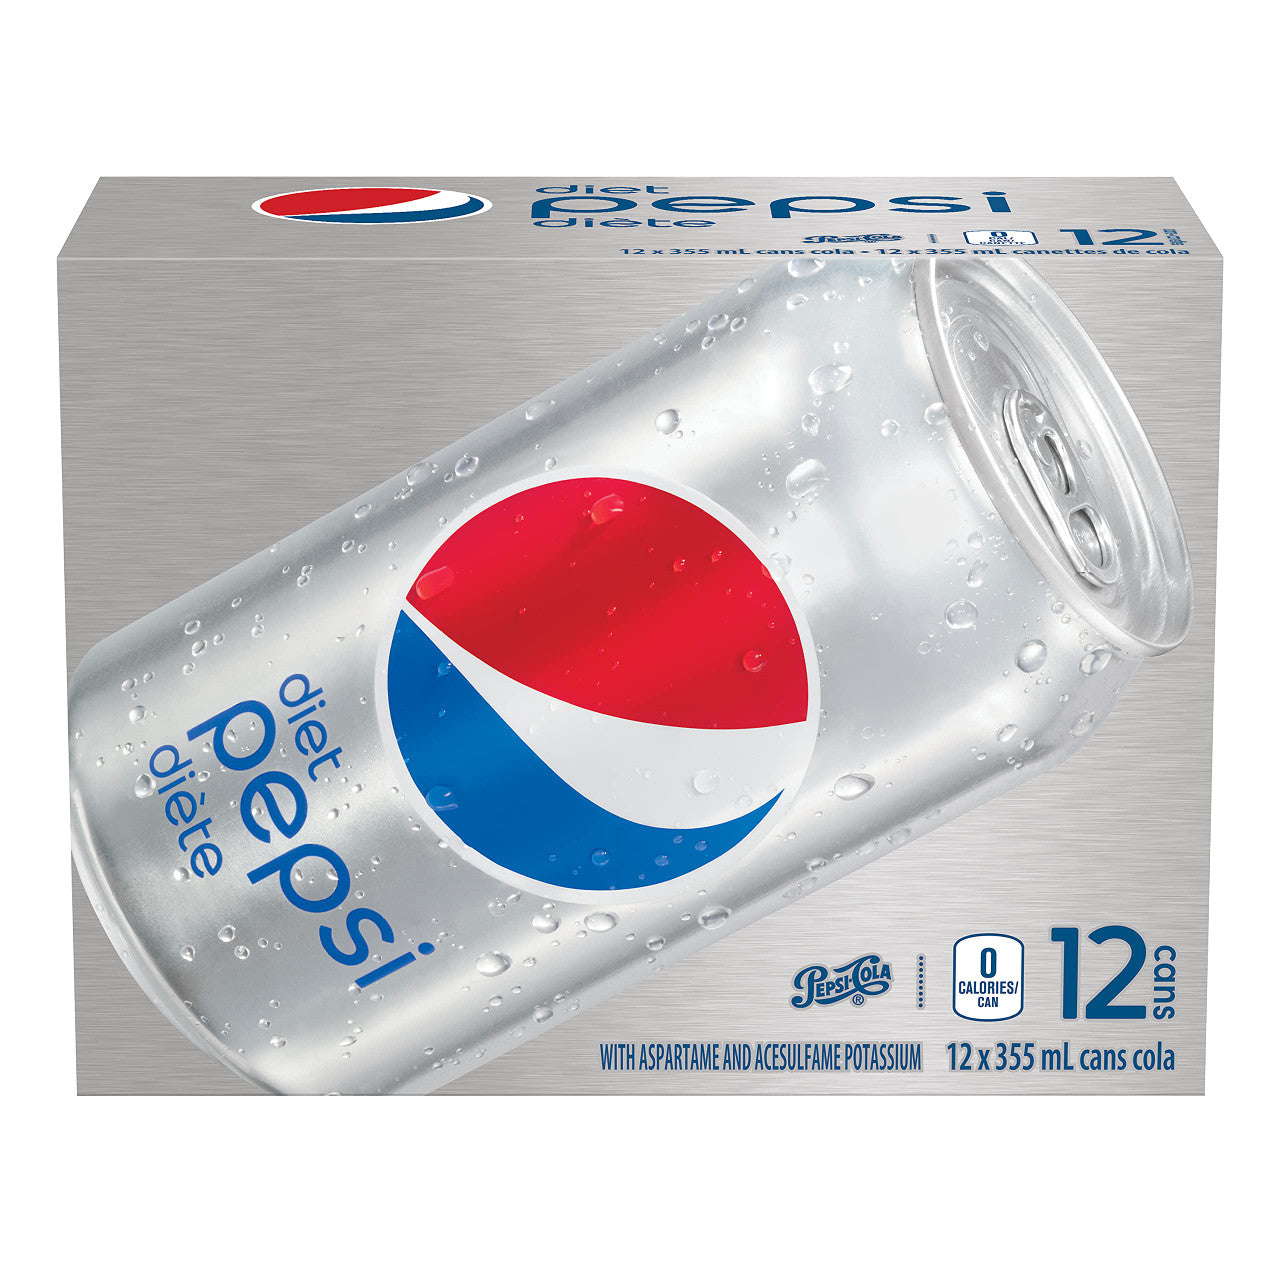 Diet Pepsi Soft Drink Pop Cans, 355mL/12oz., 12 Pack, {Imported from Canada}